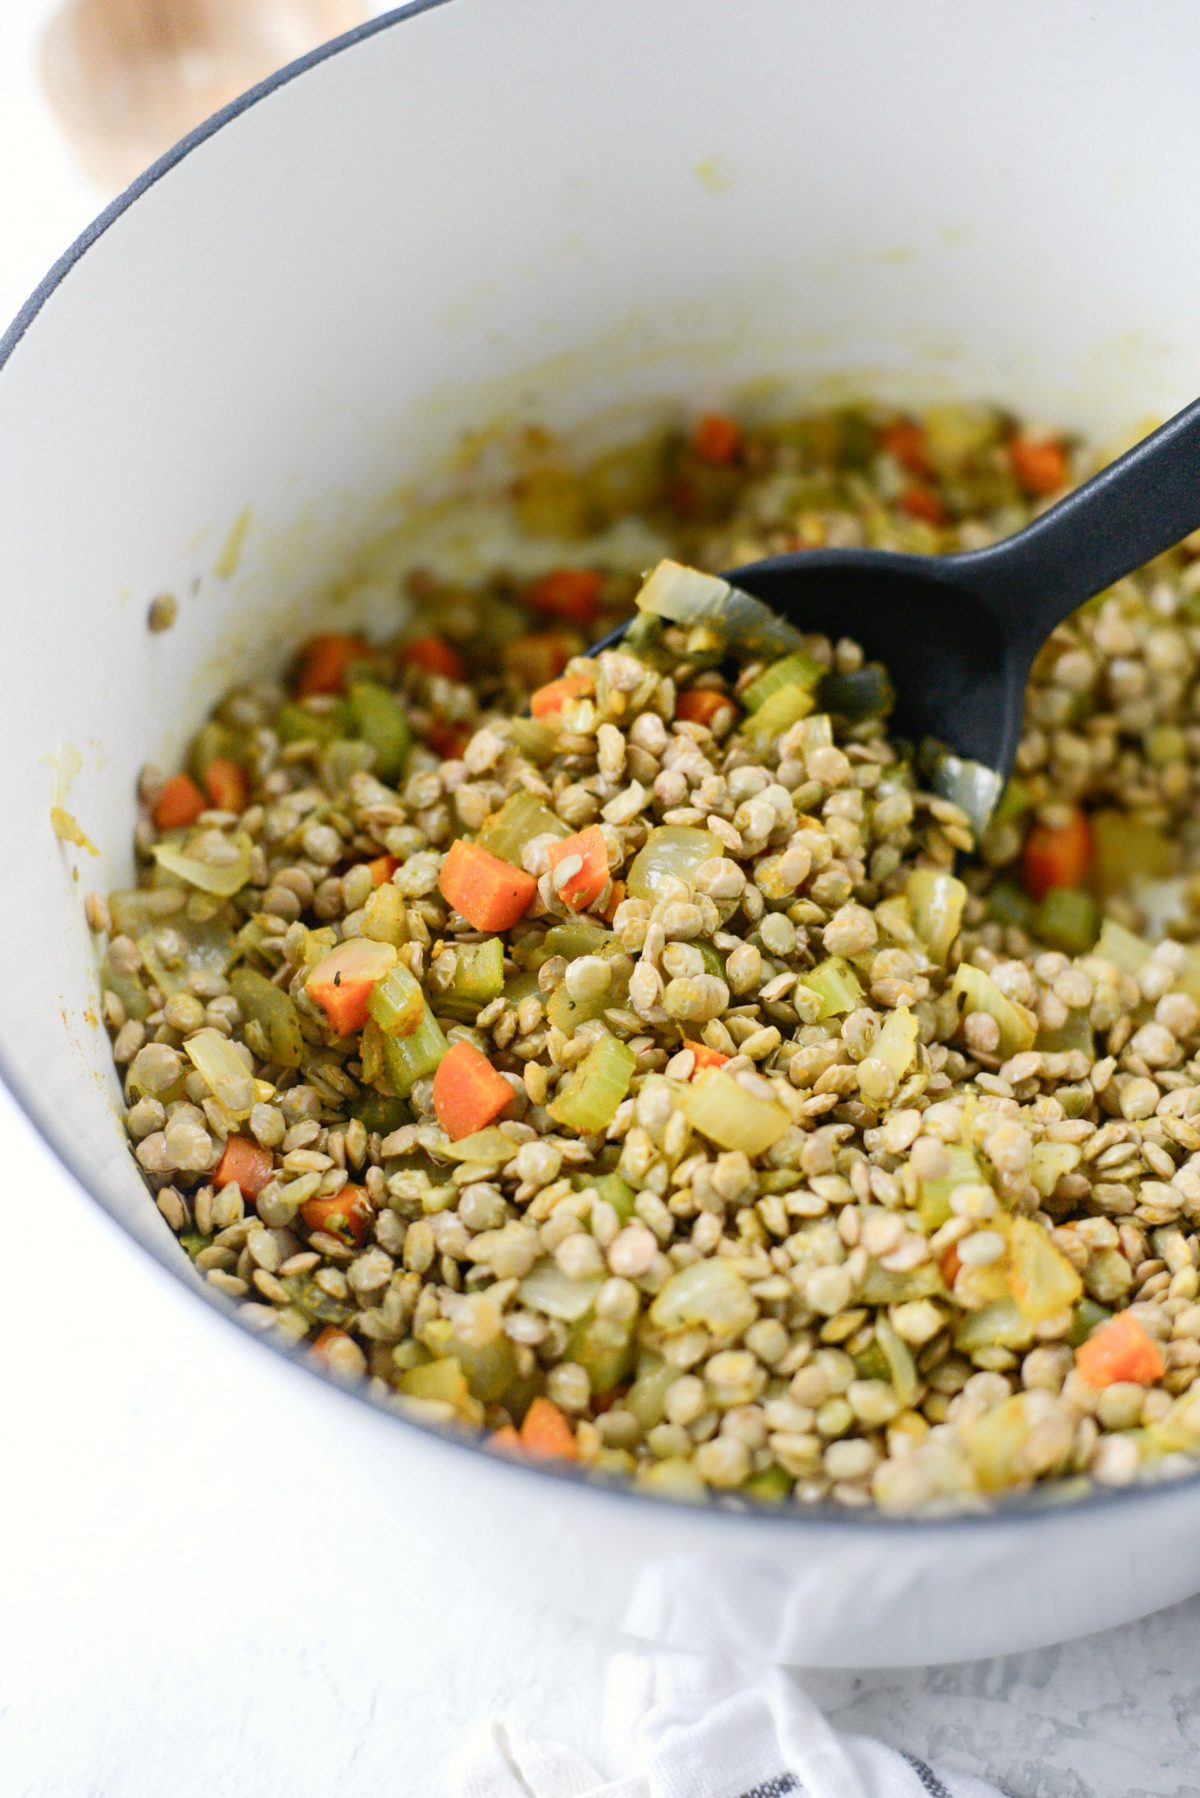 add in lentils and stir to combine.